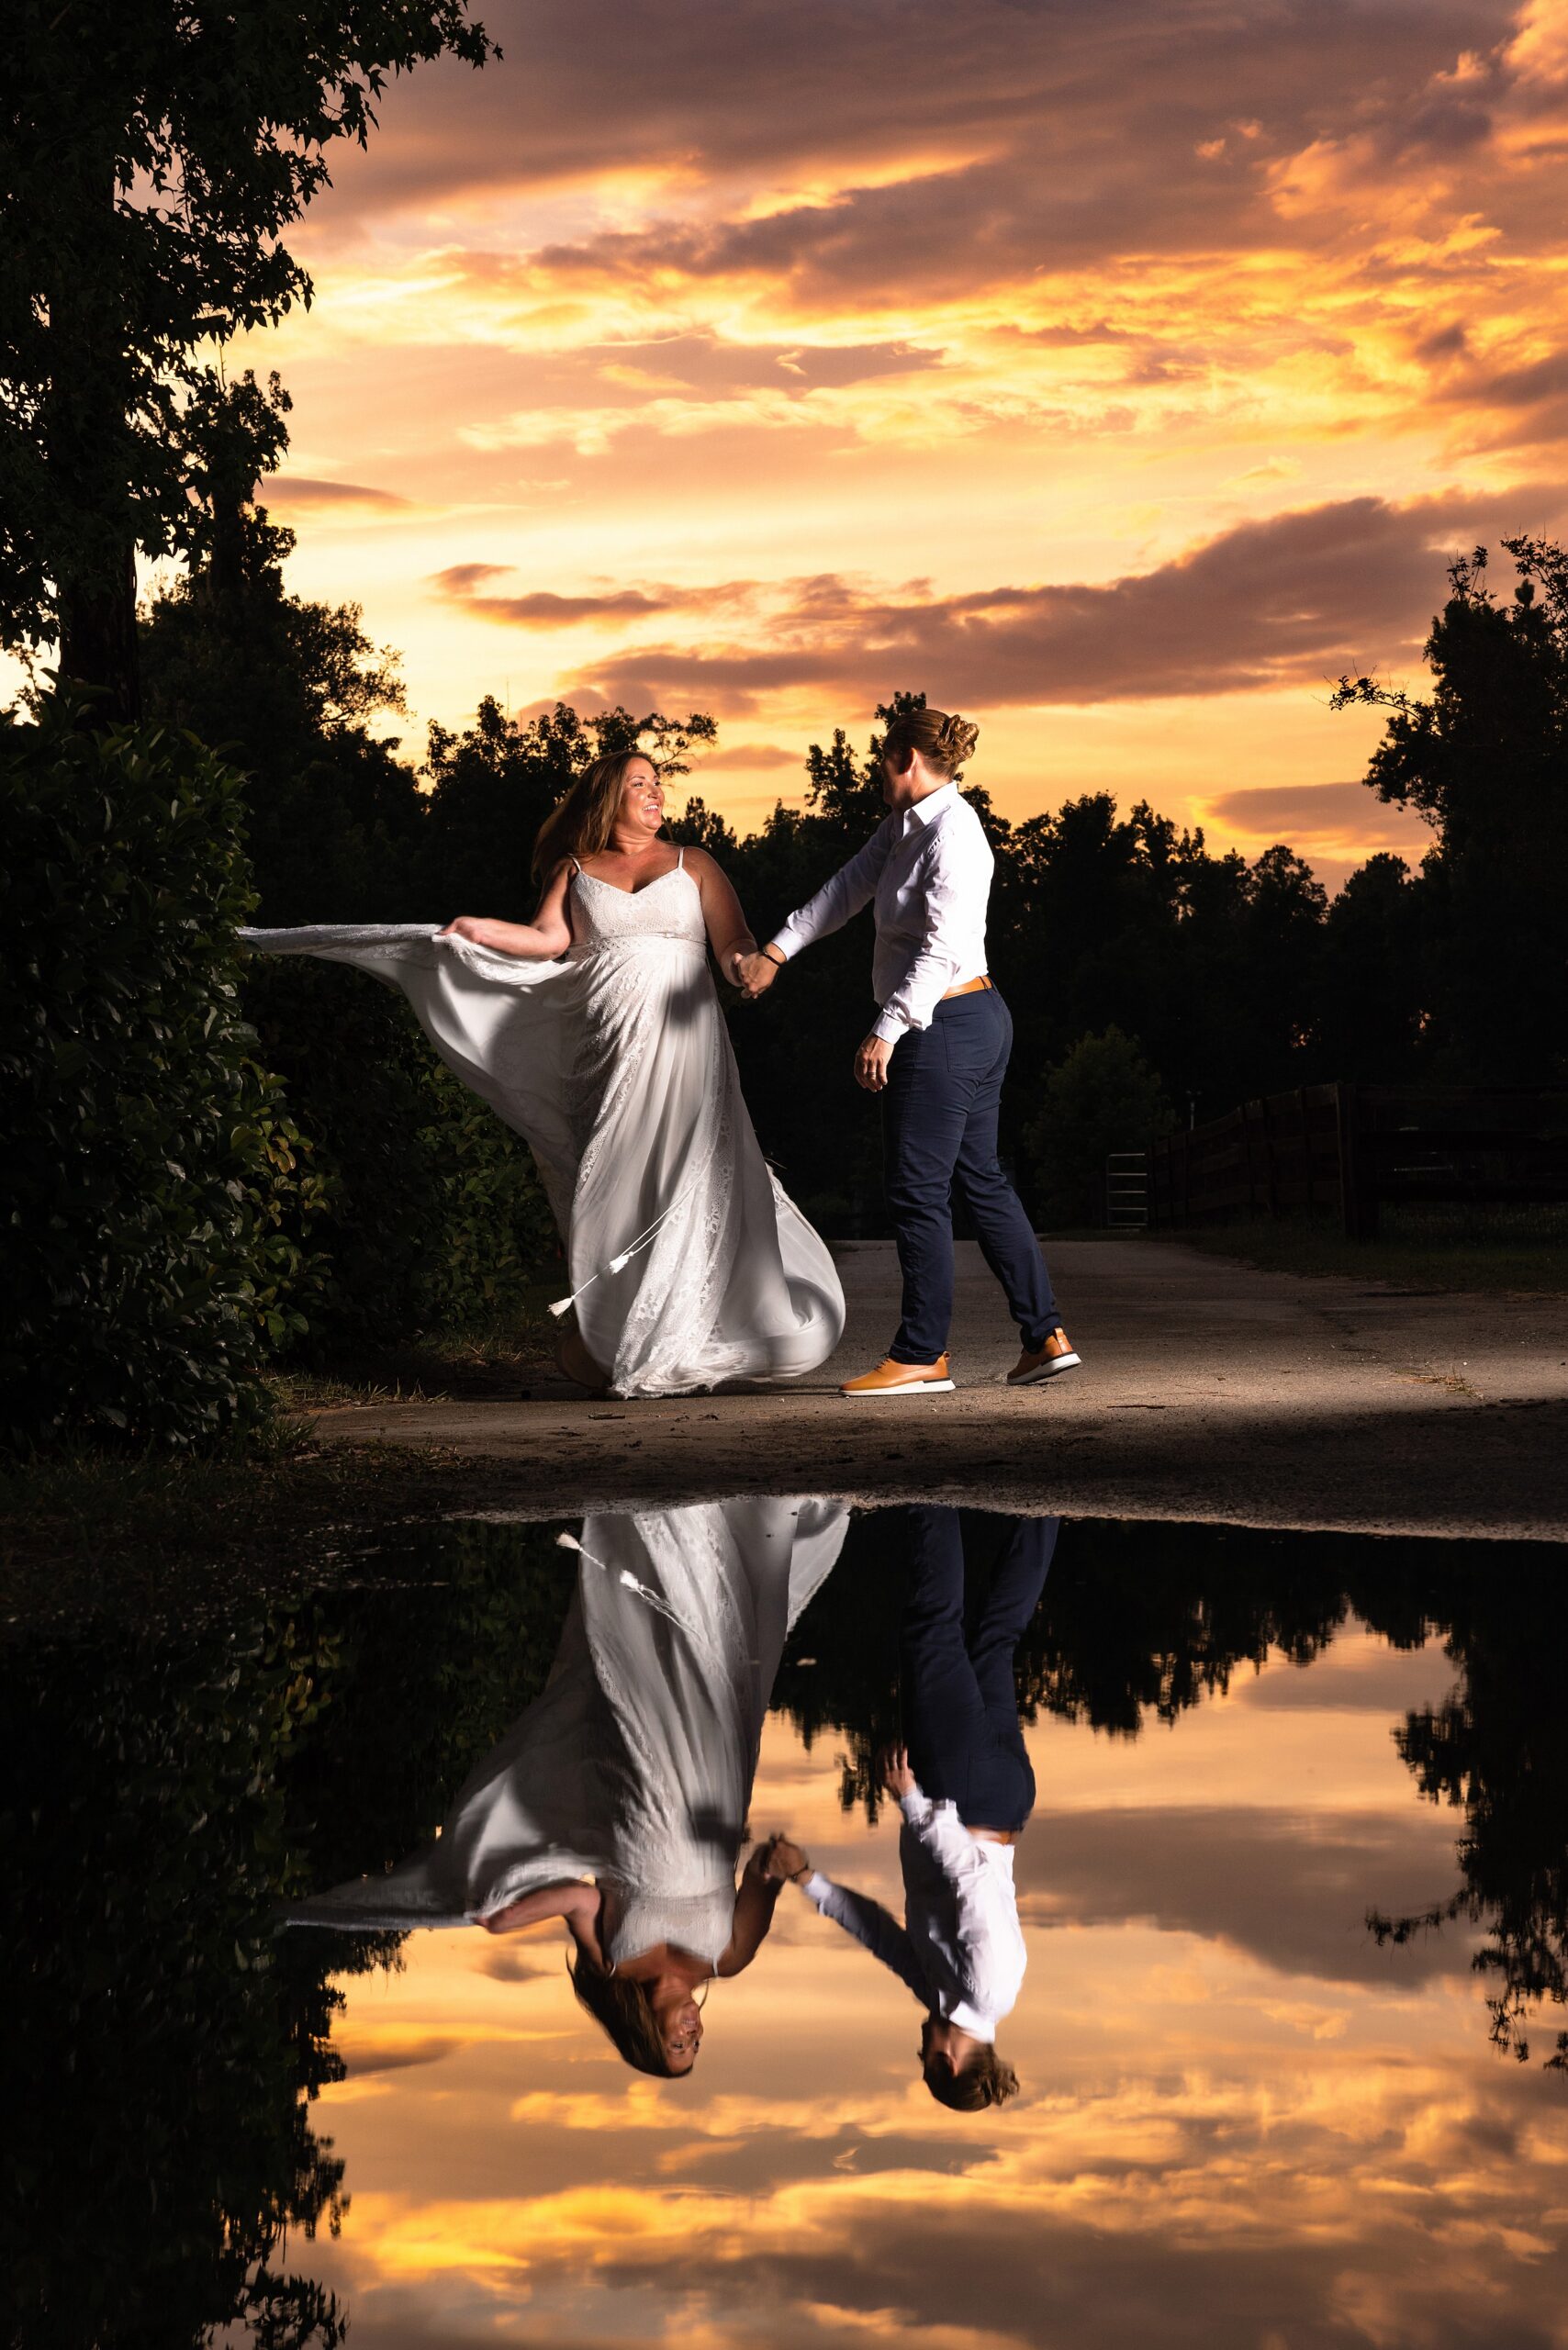 Newlyweds play in a garden at sunset while holding hands